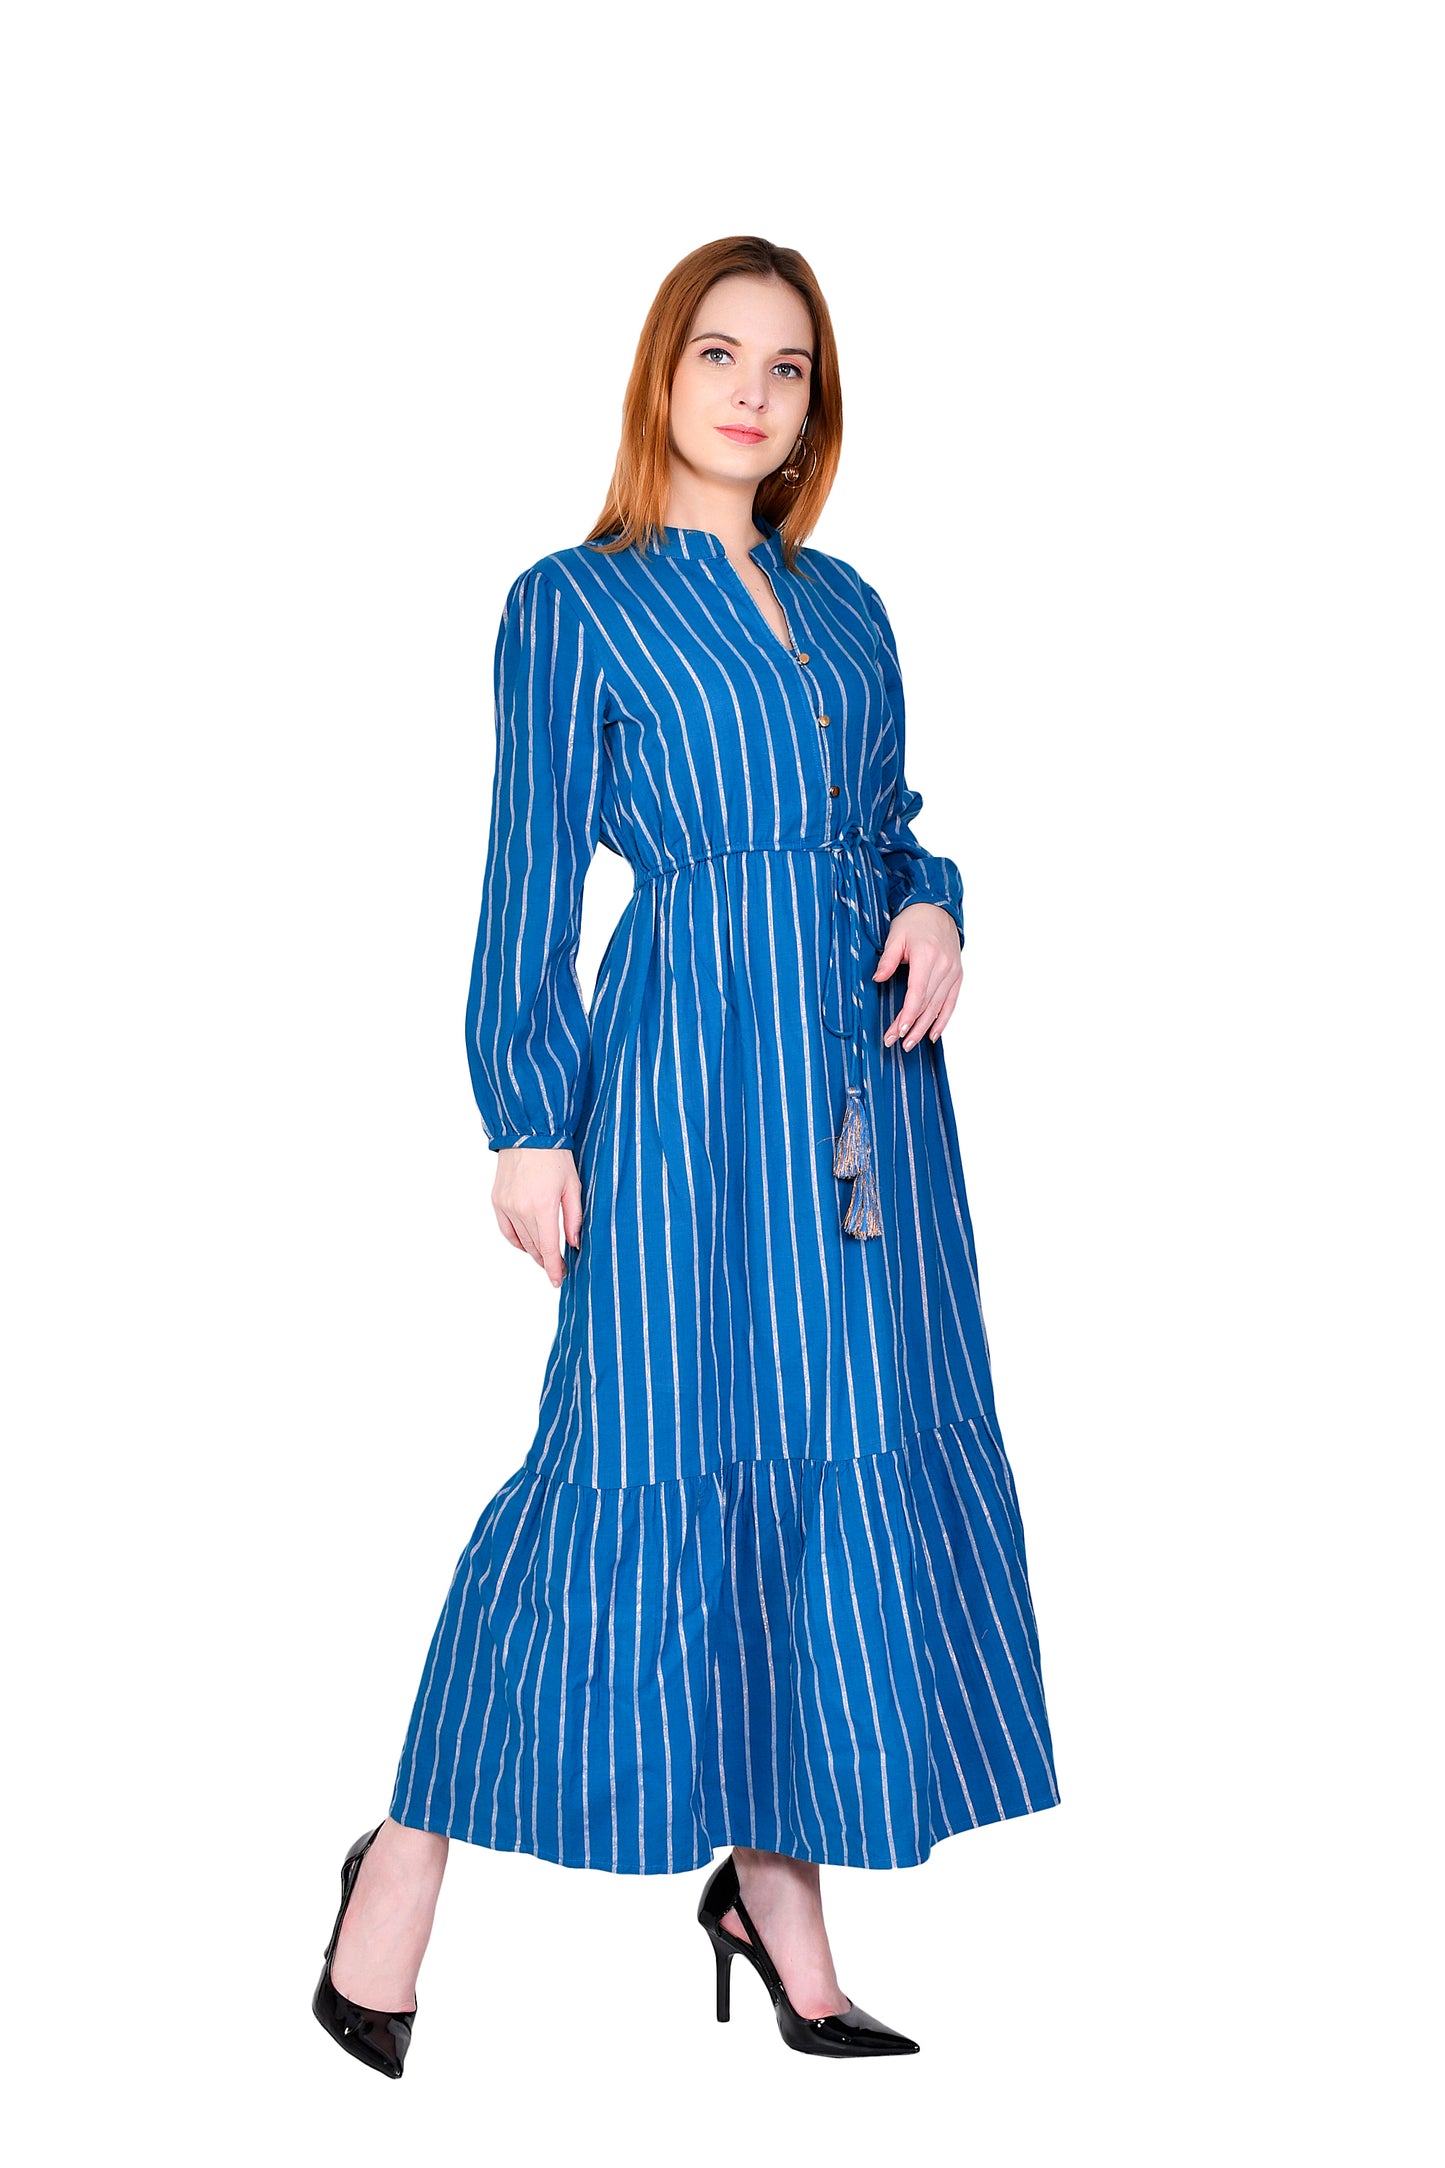 BLUE WINTER DRESS WITH MULTICOLOERED METALLIC LUREX STRIPES AND TASSELS